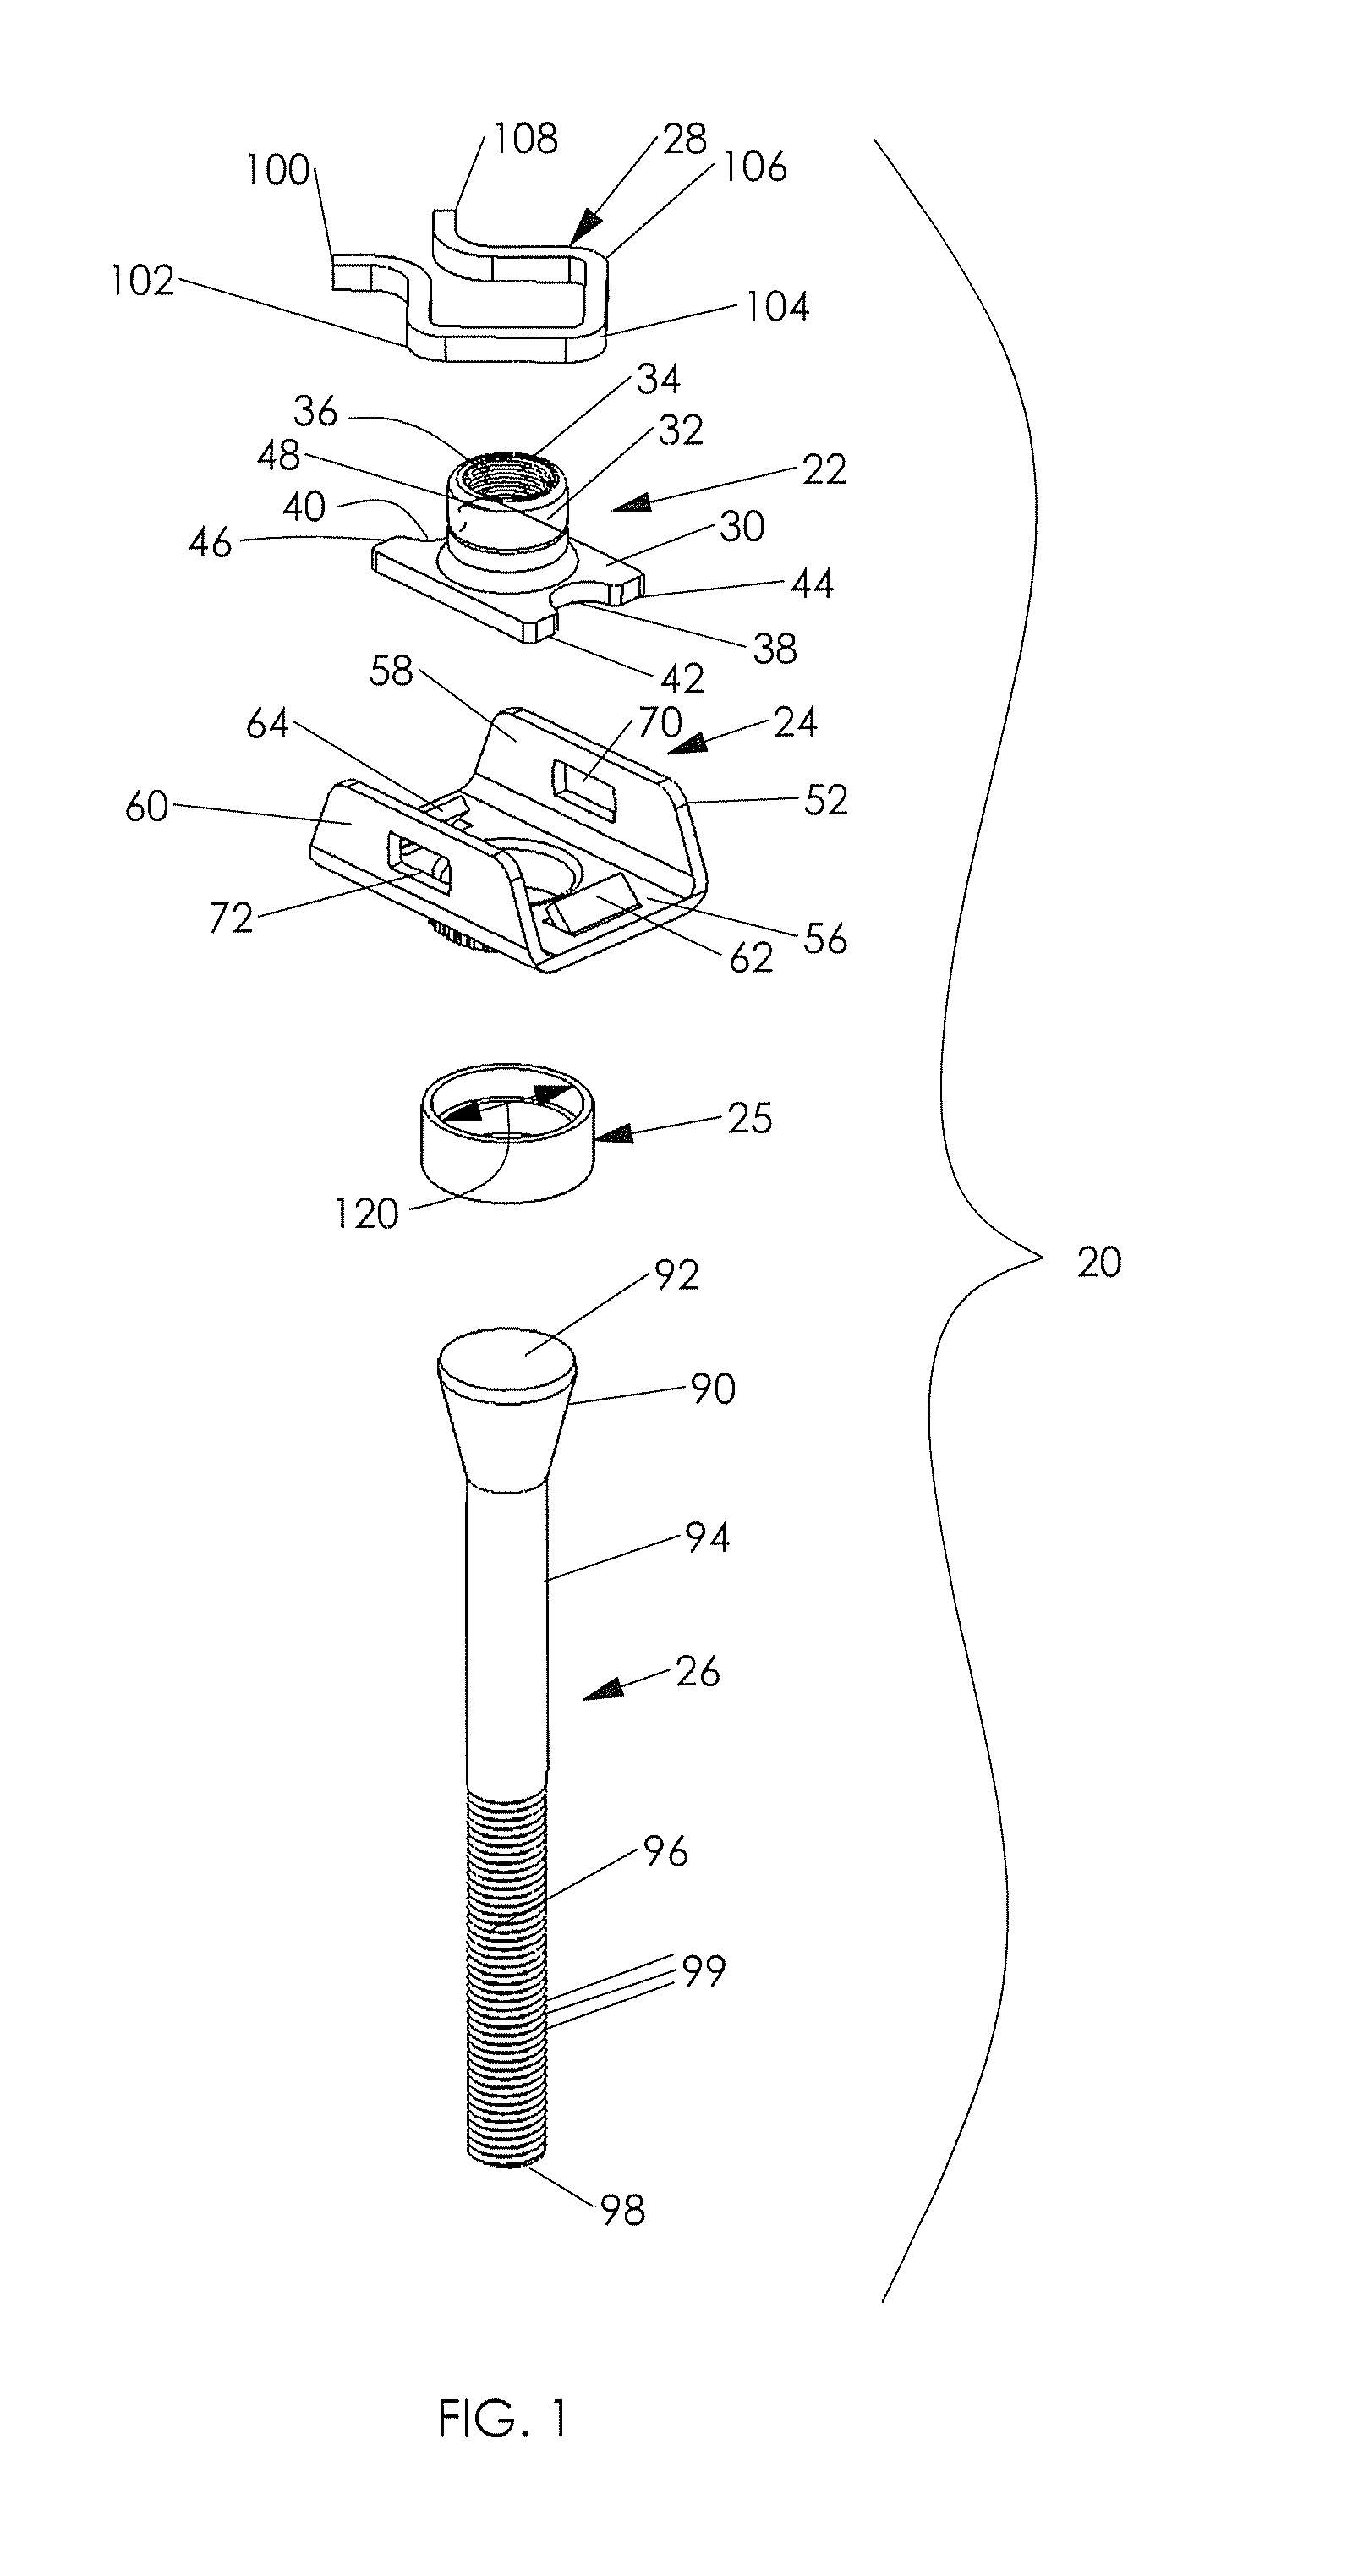 Nut plate fastener assembly for composite materials